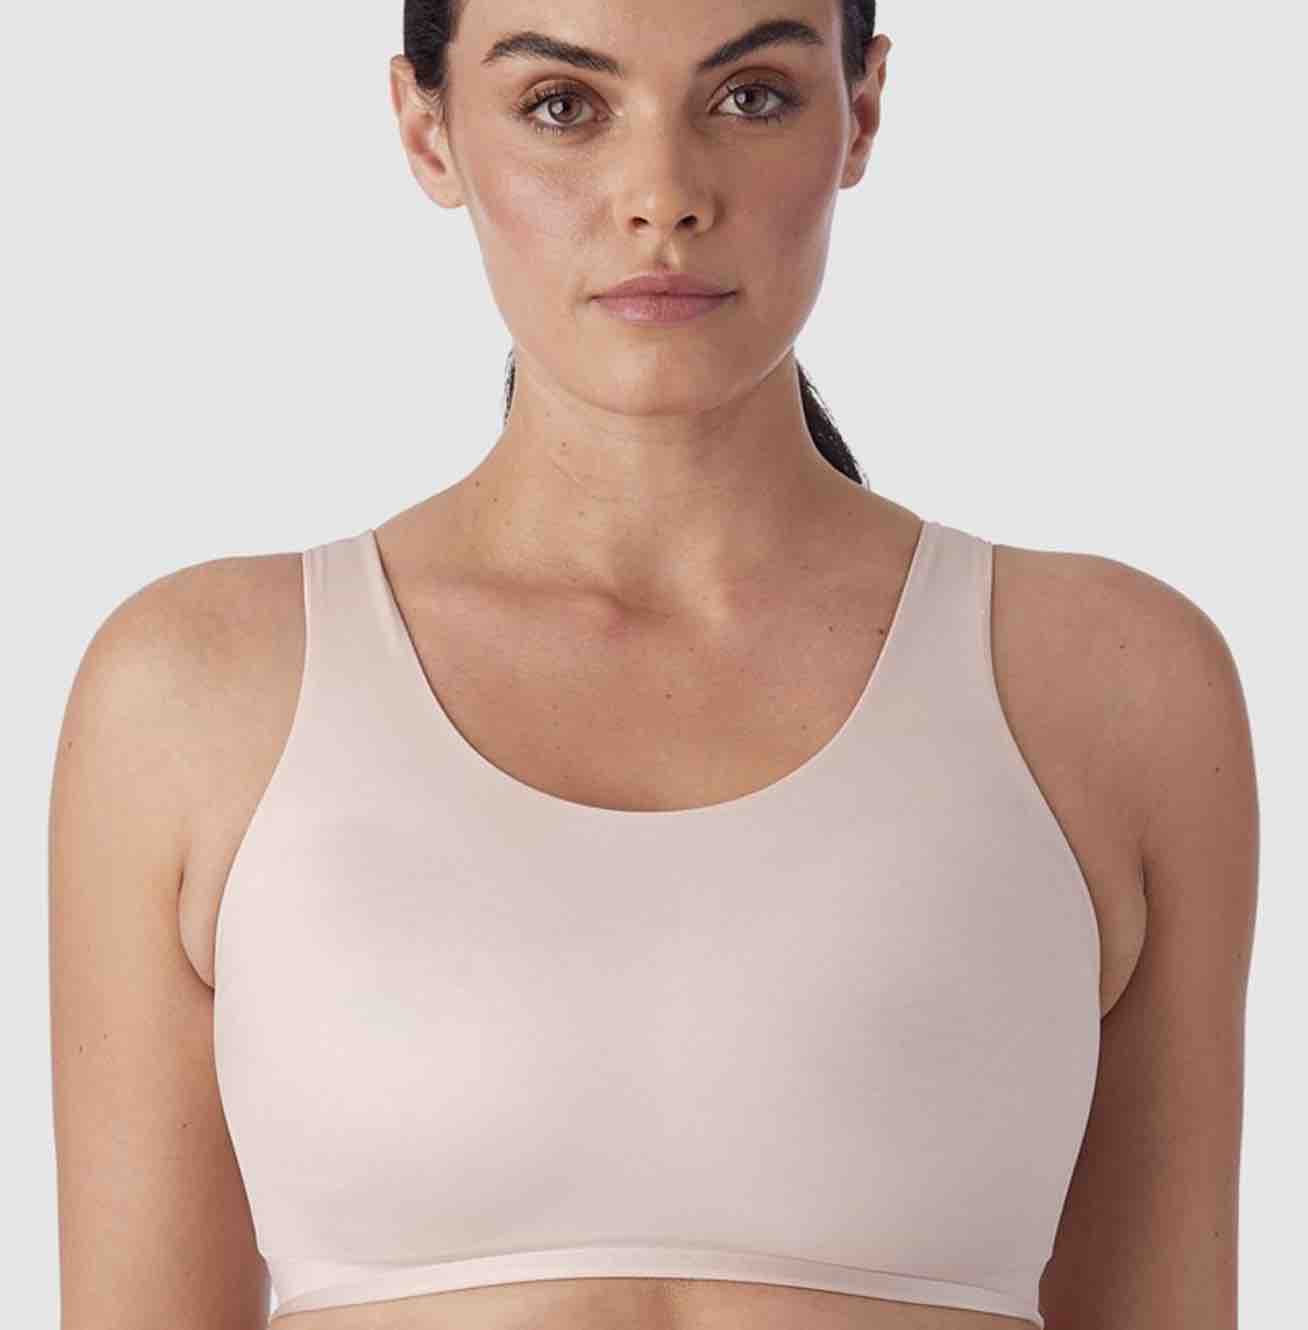 Miraclesuit Cupid Skin Benefit Crop Top Style Shapewear Bra with